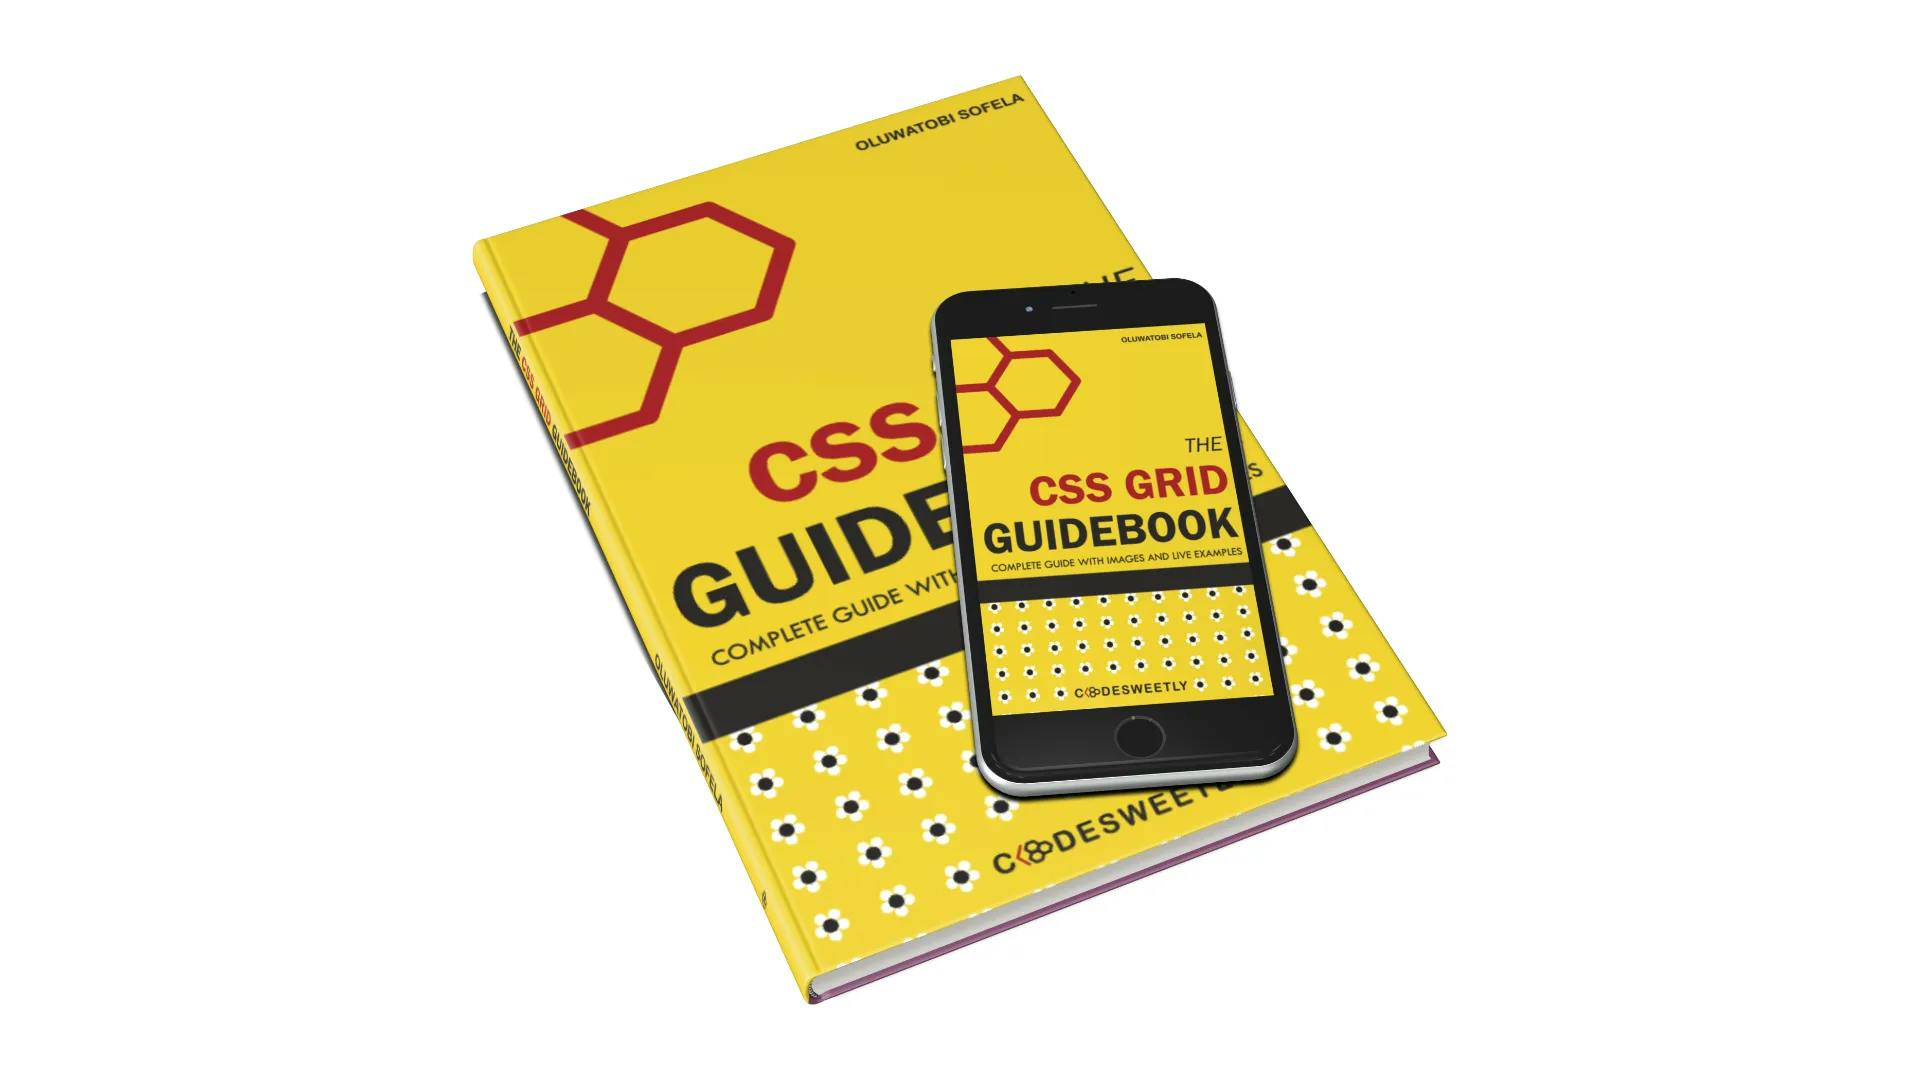 The CSS Grid Guidebook's image